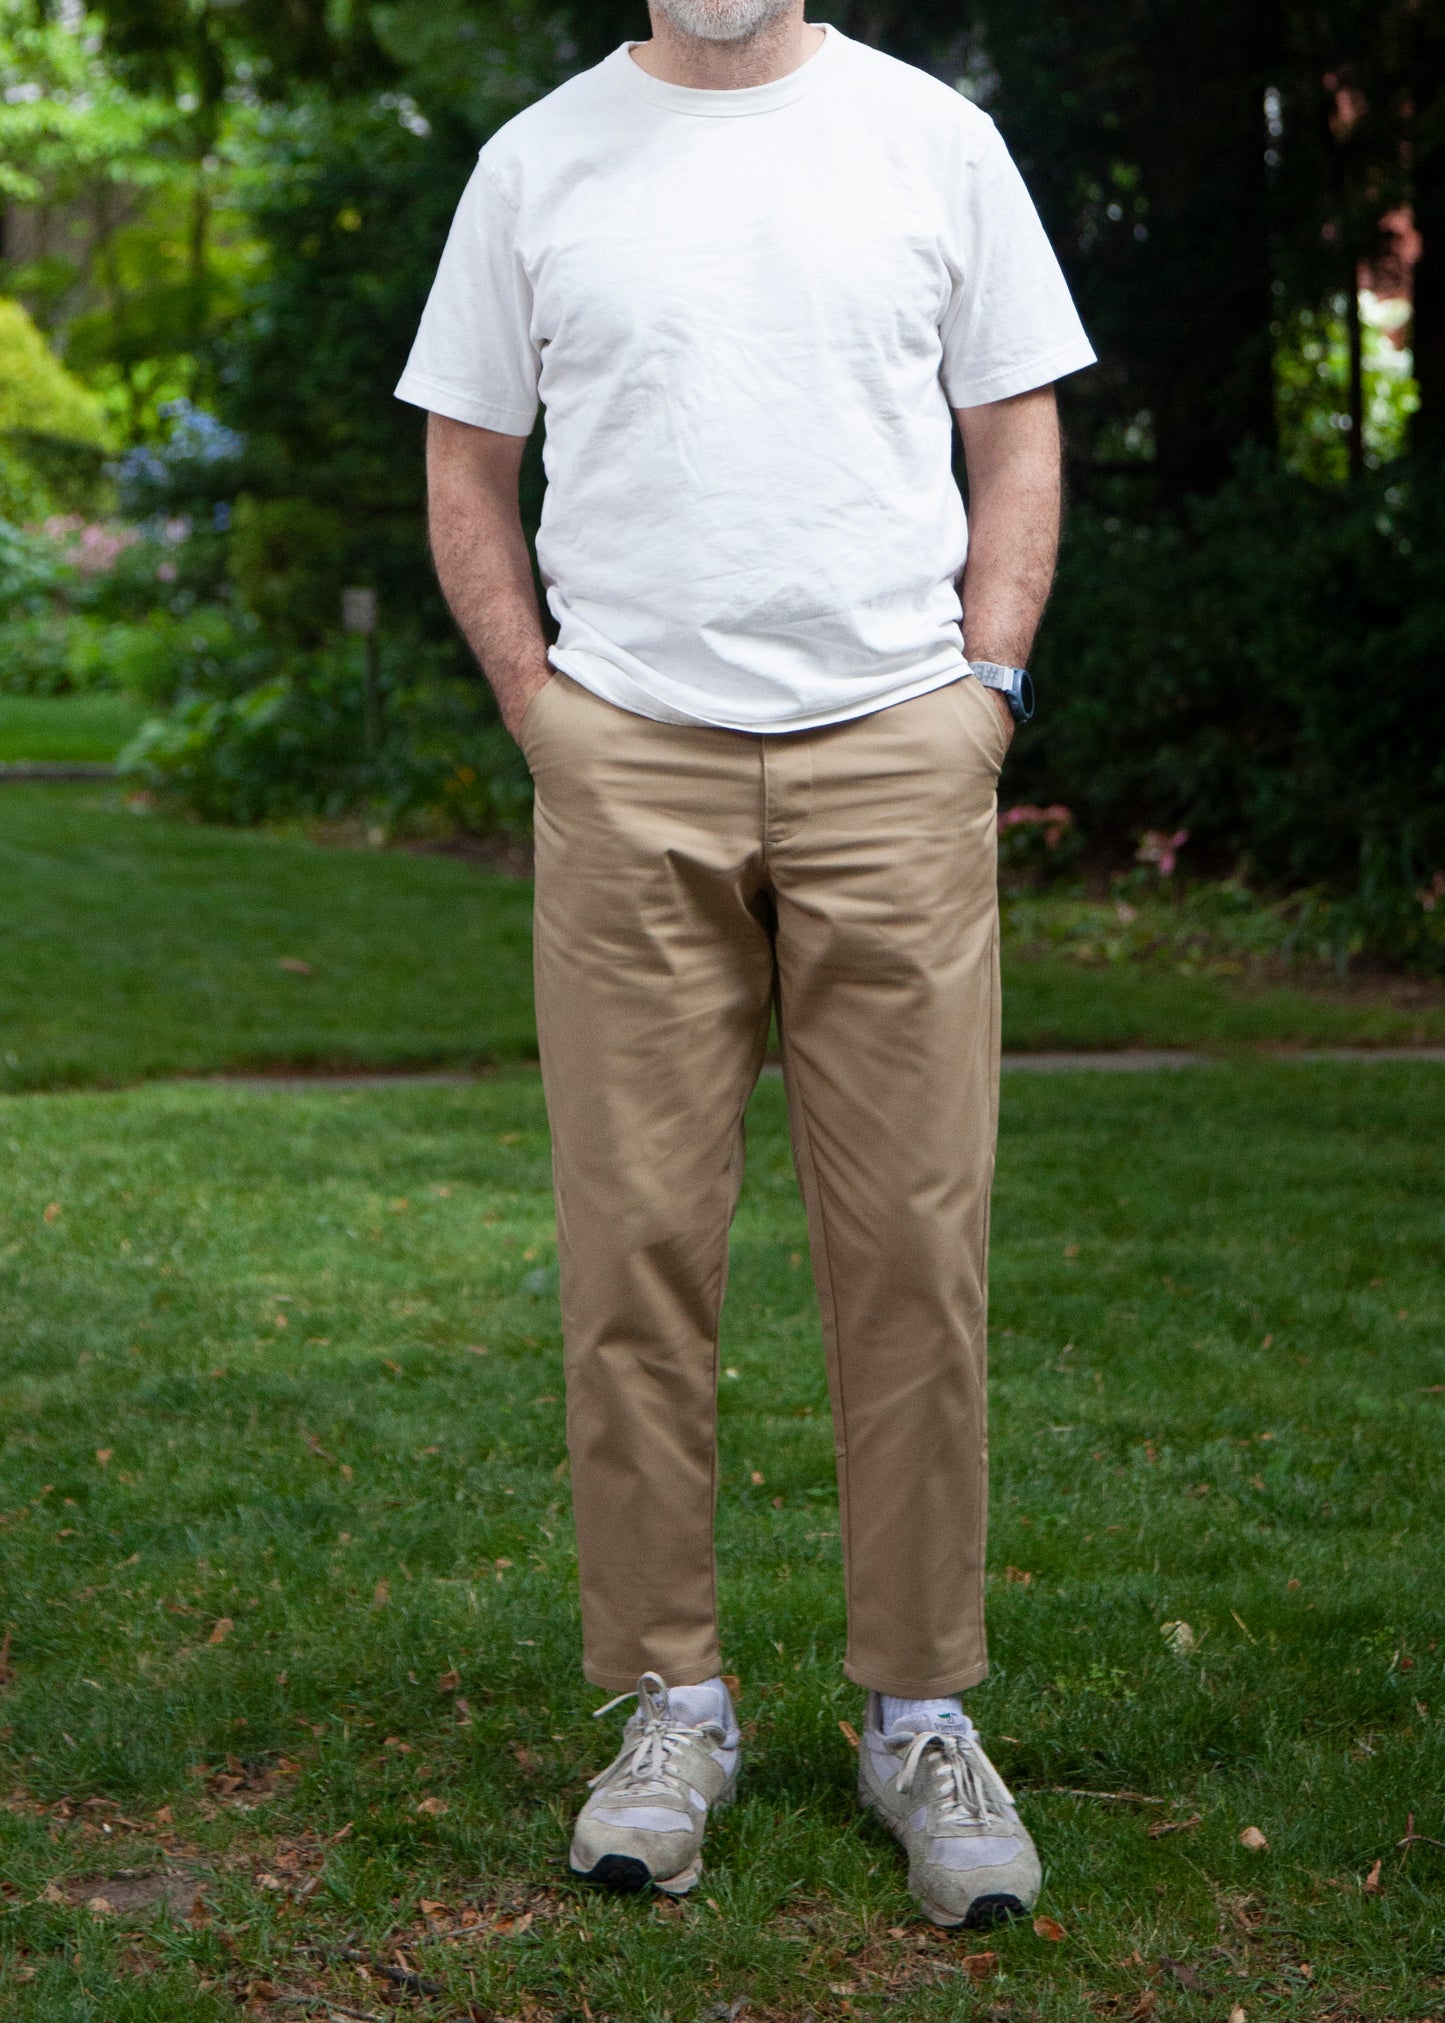 Model standing on grass wearing white t-shirt, khaki lightweight danver pants and white/grey sneakers. Front